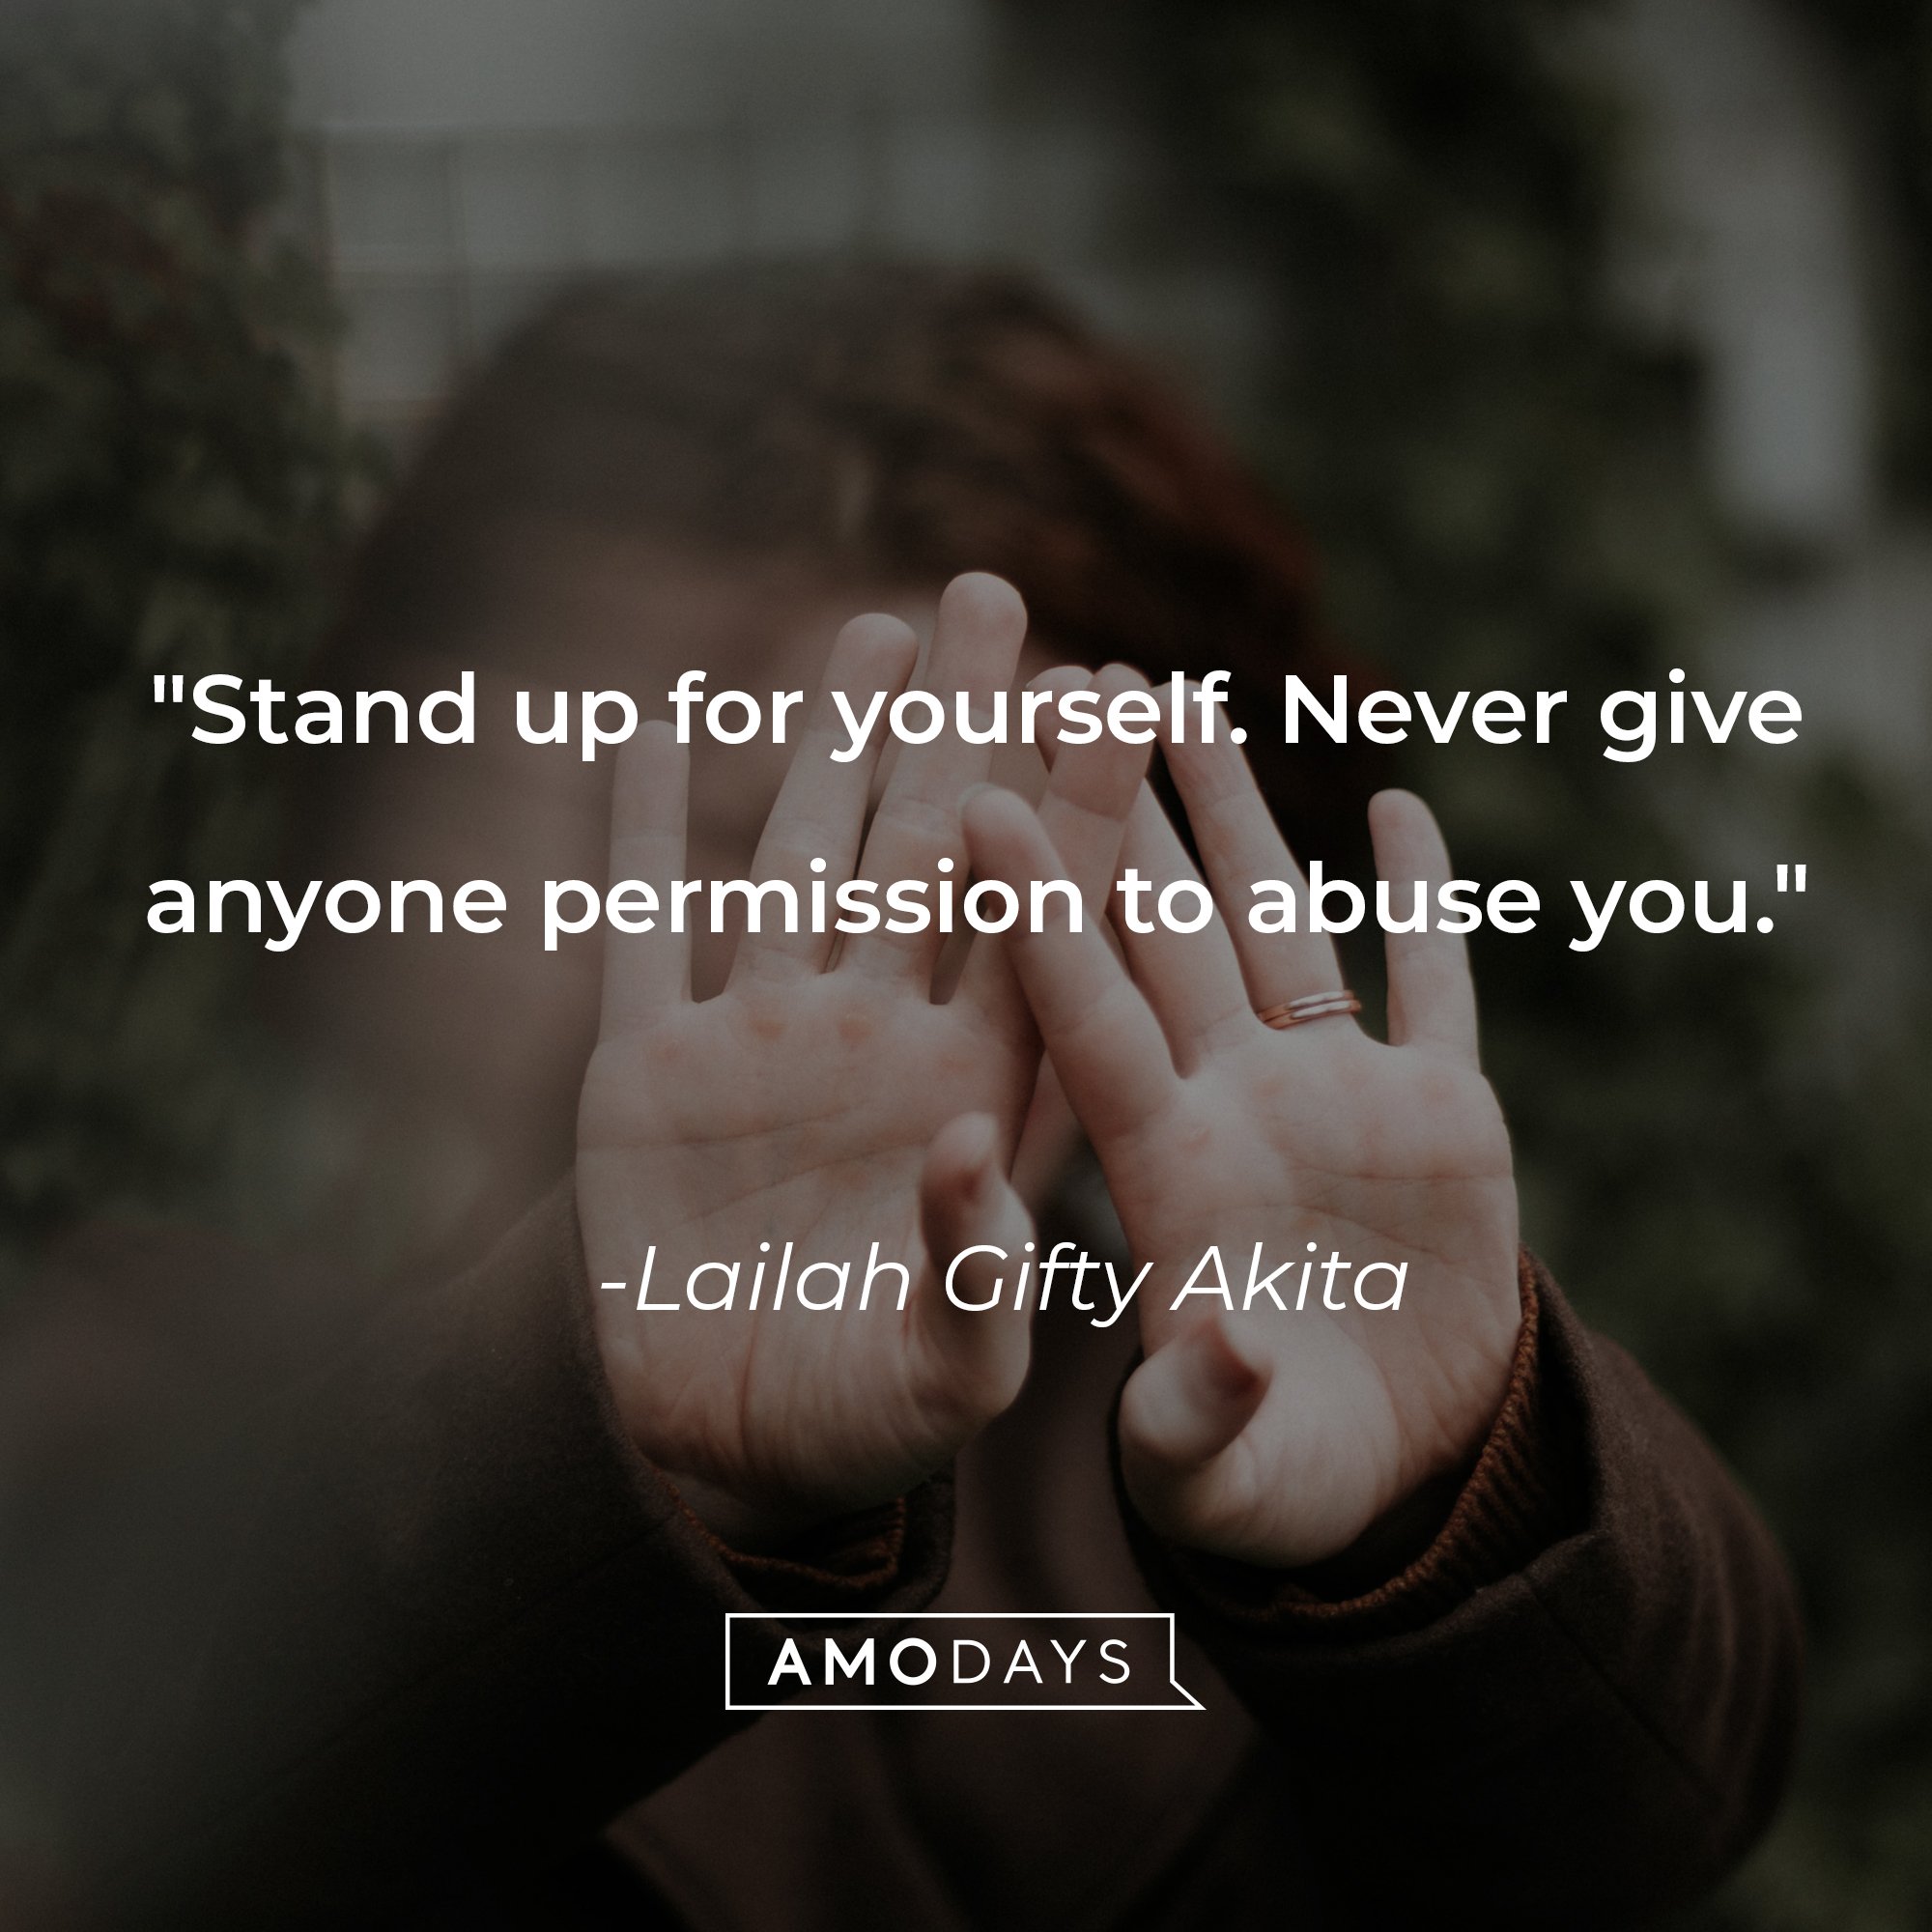 Lailah Gifty Akita's quote: "Stand up for yourself. Never give anyone permission to abuse you." | Image: AmoDays